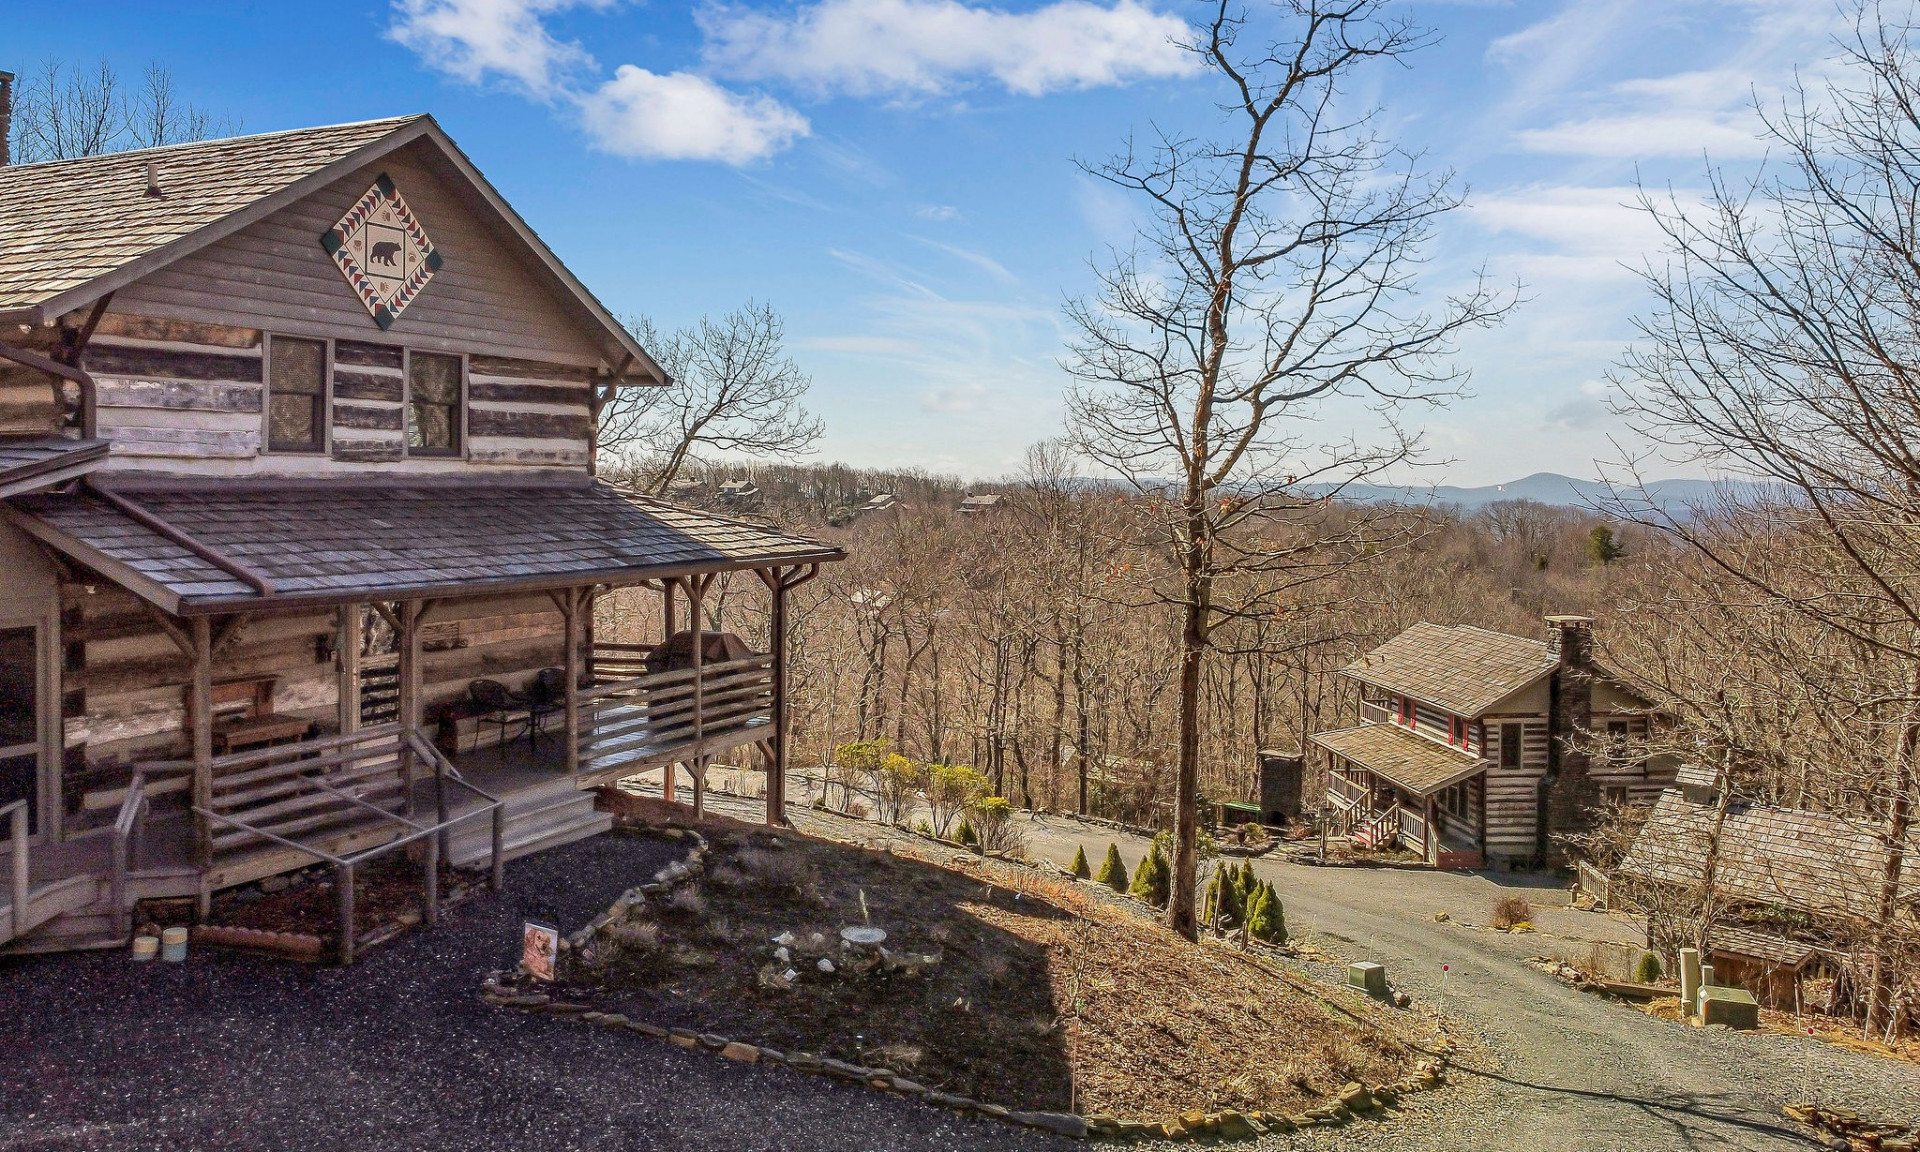 Escape to the heart of the Blue Ridge Mountains!